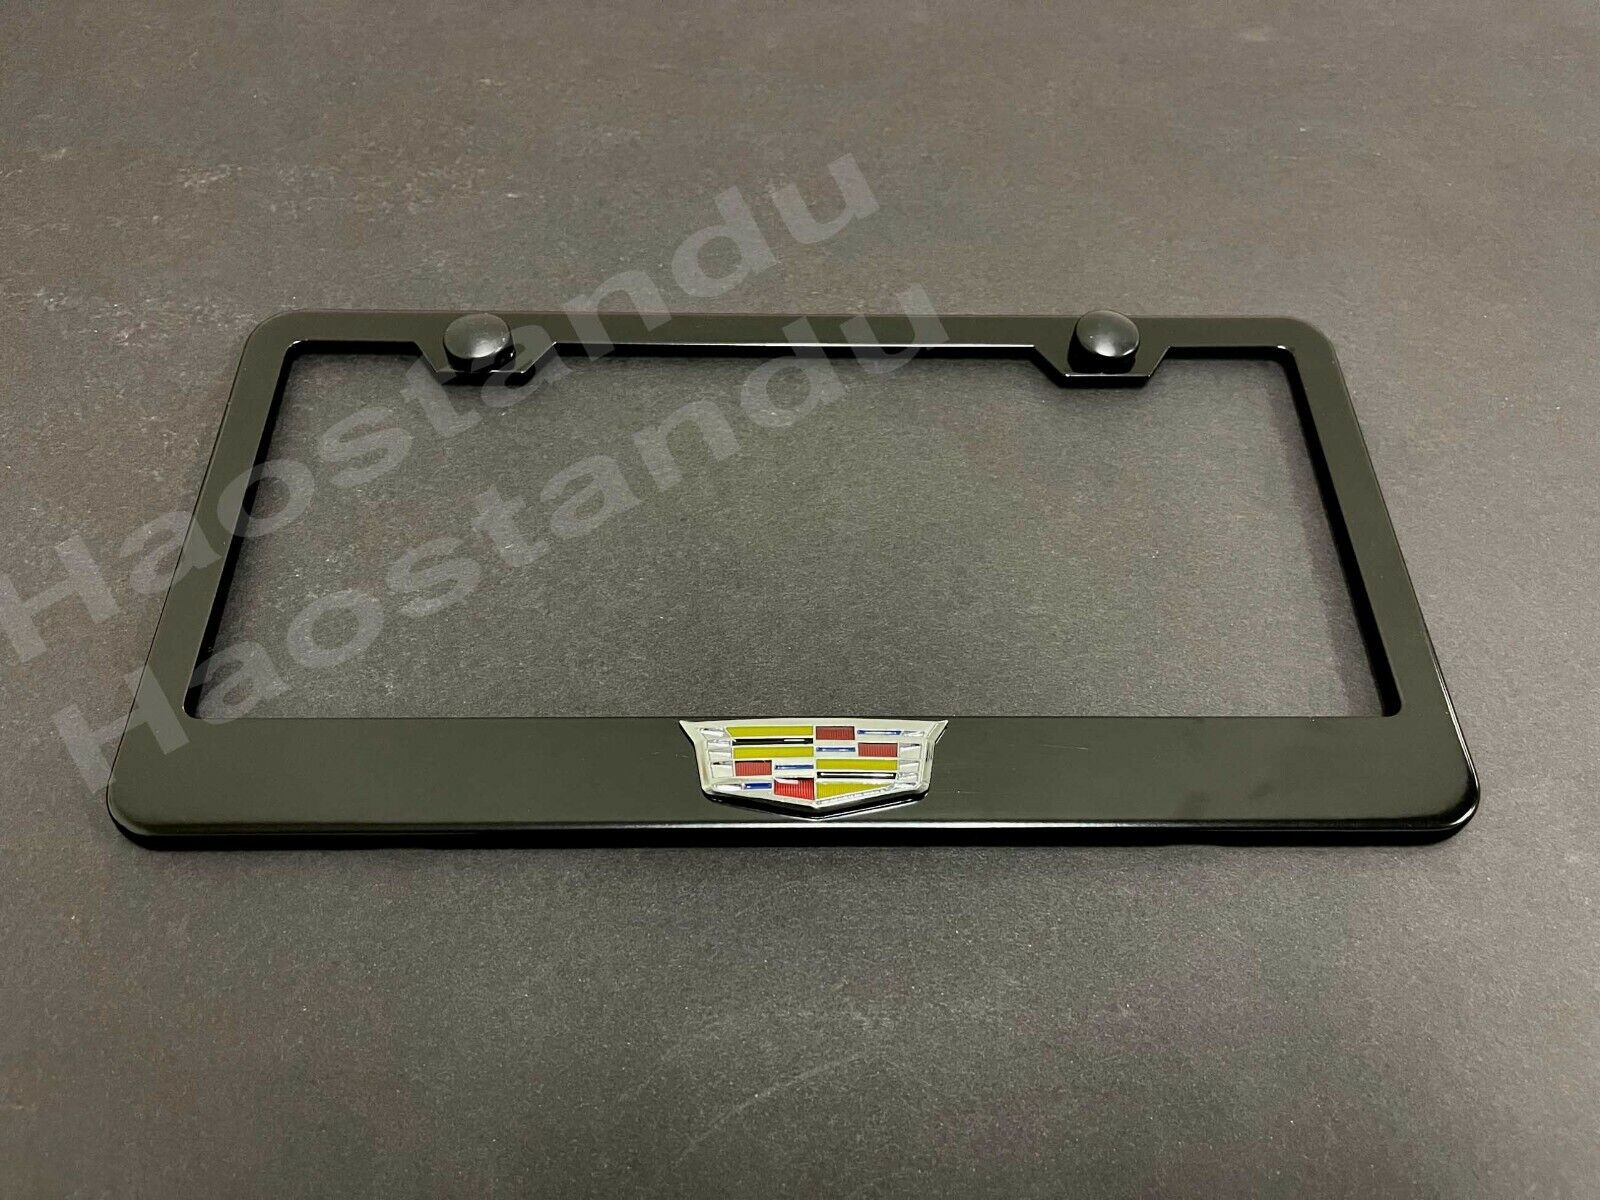 1xCadillacLOGO 3D Emblem BLACK Stainless License Plate Frame RUST FREE (COLOR)